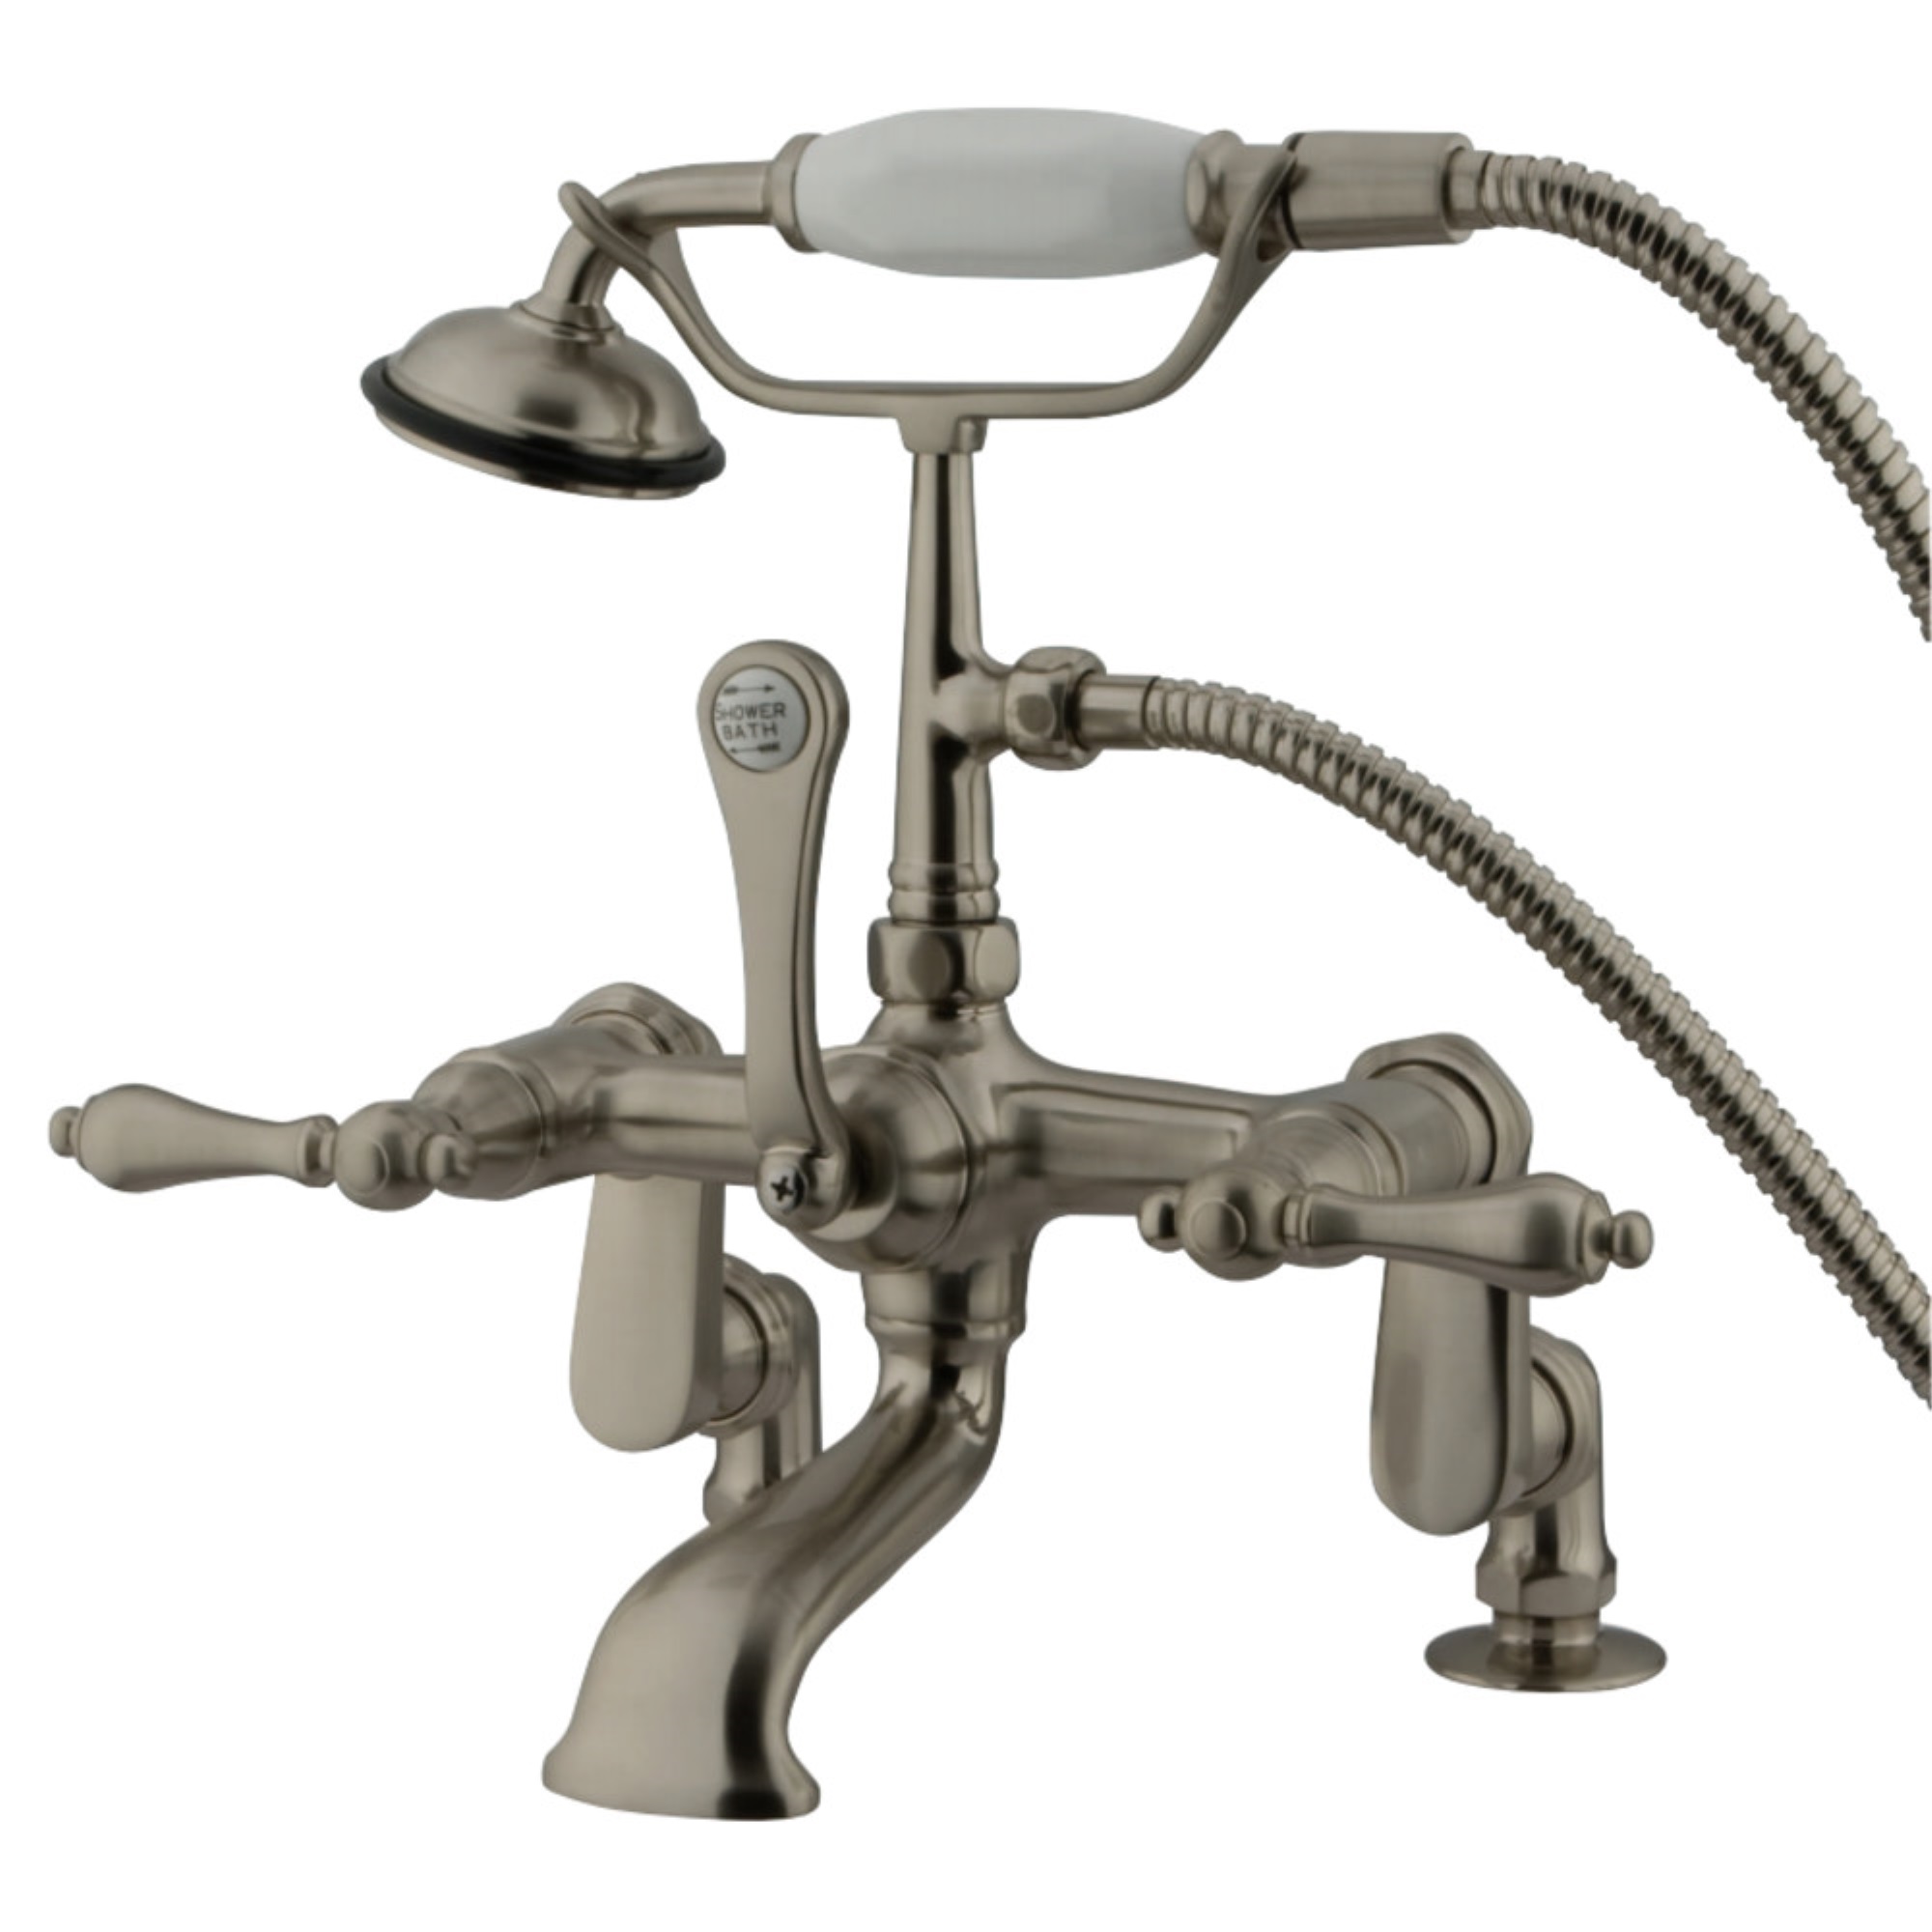 Kingston Brass Cc651T8 Clawfoot Tub Filler With Hand Shower - Brushed Nickel Finish